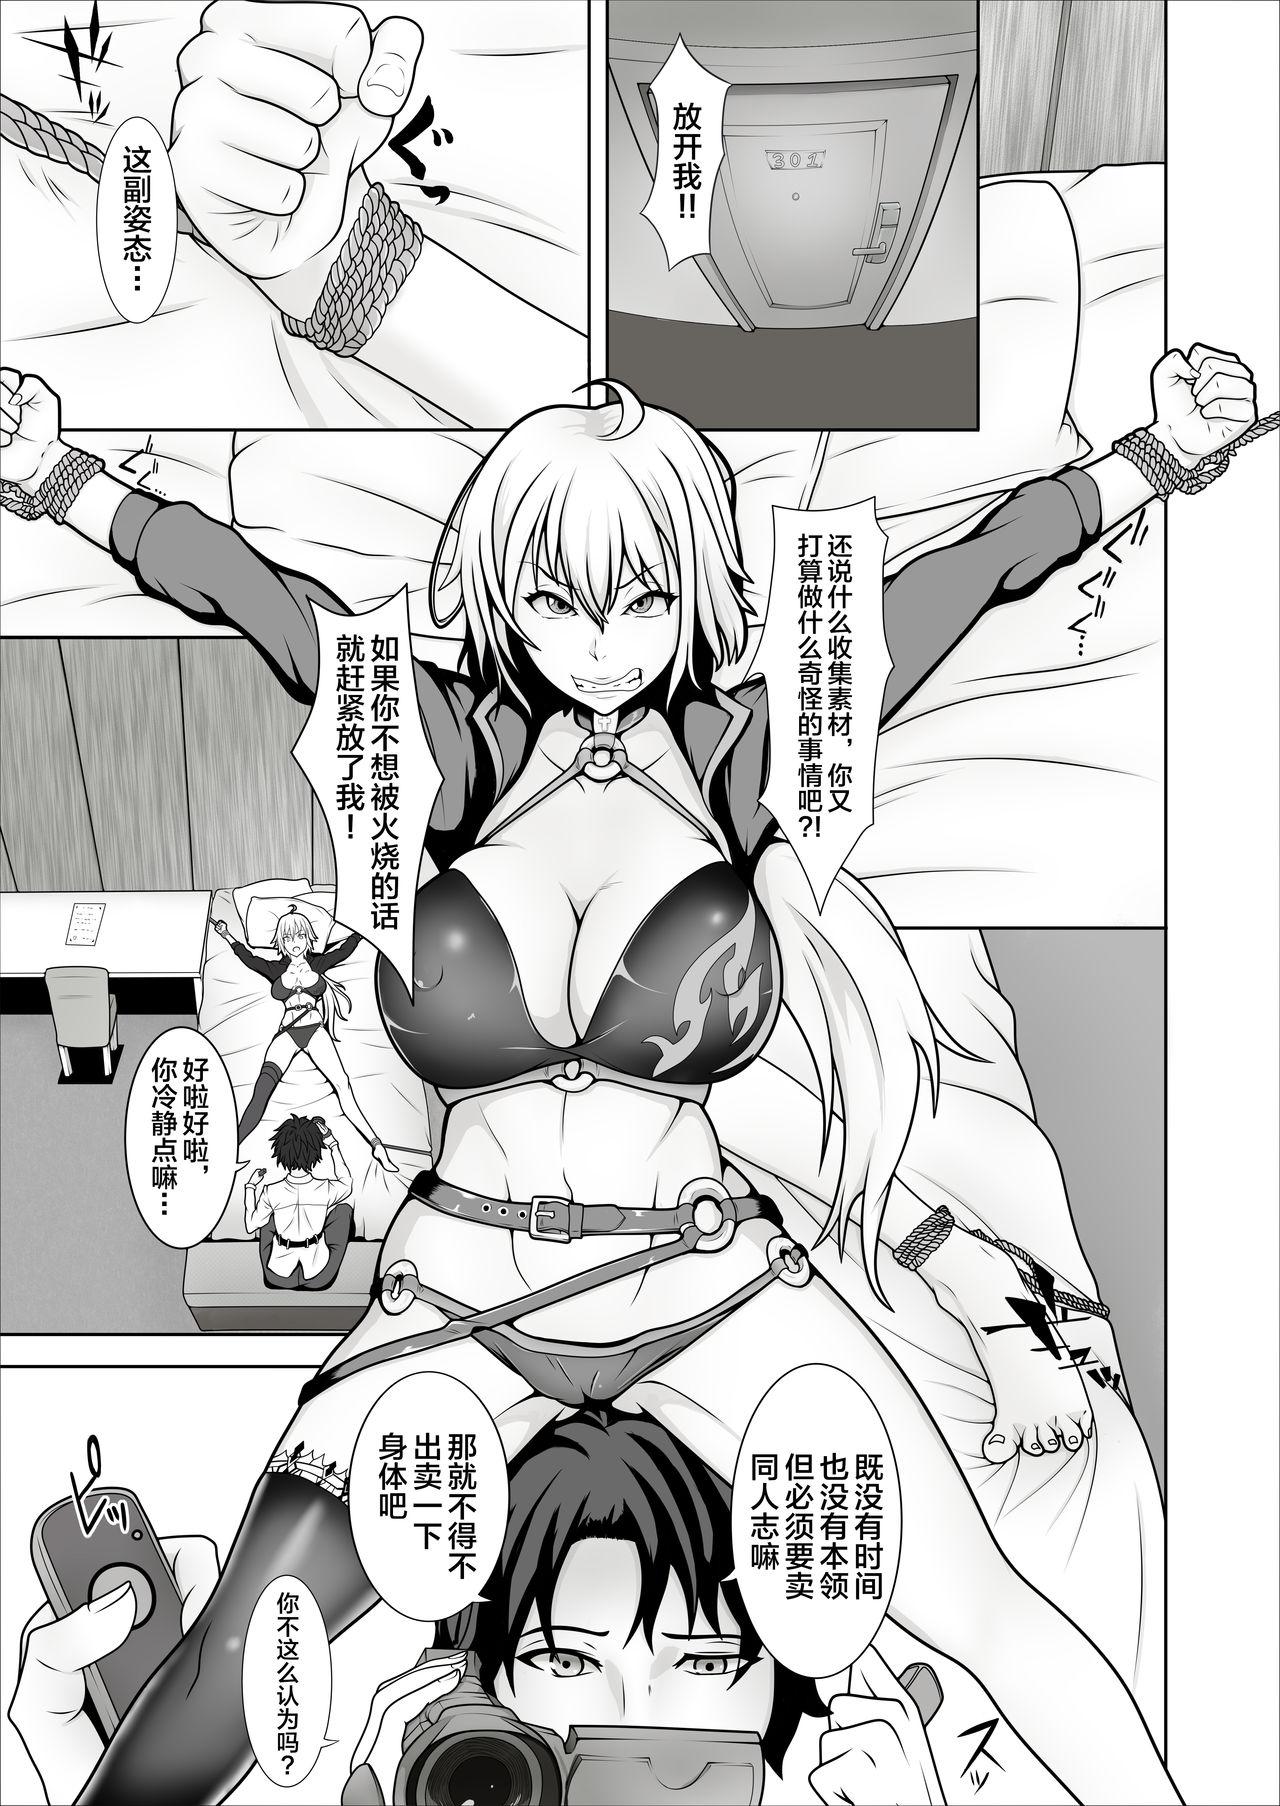 Real 俺のジャンヌは性処理係 - Fate grand order Ebony - Page 11